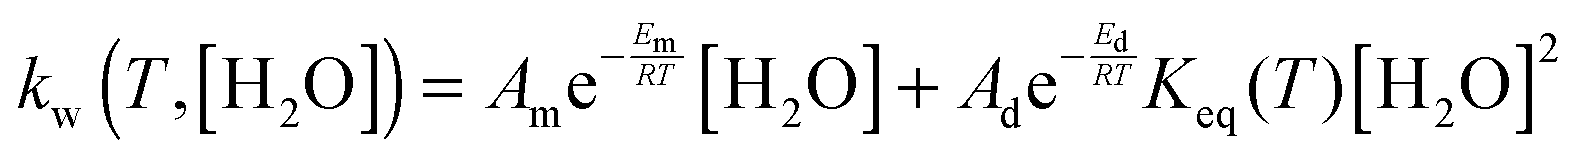 Temperature Dependence Of The Reaction Of Anti Ch 3 Choo With Water Vapor Physical Chemistry Chemical Physics Rsc Publishing Doi 10 1039 C6cpe